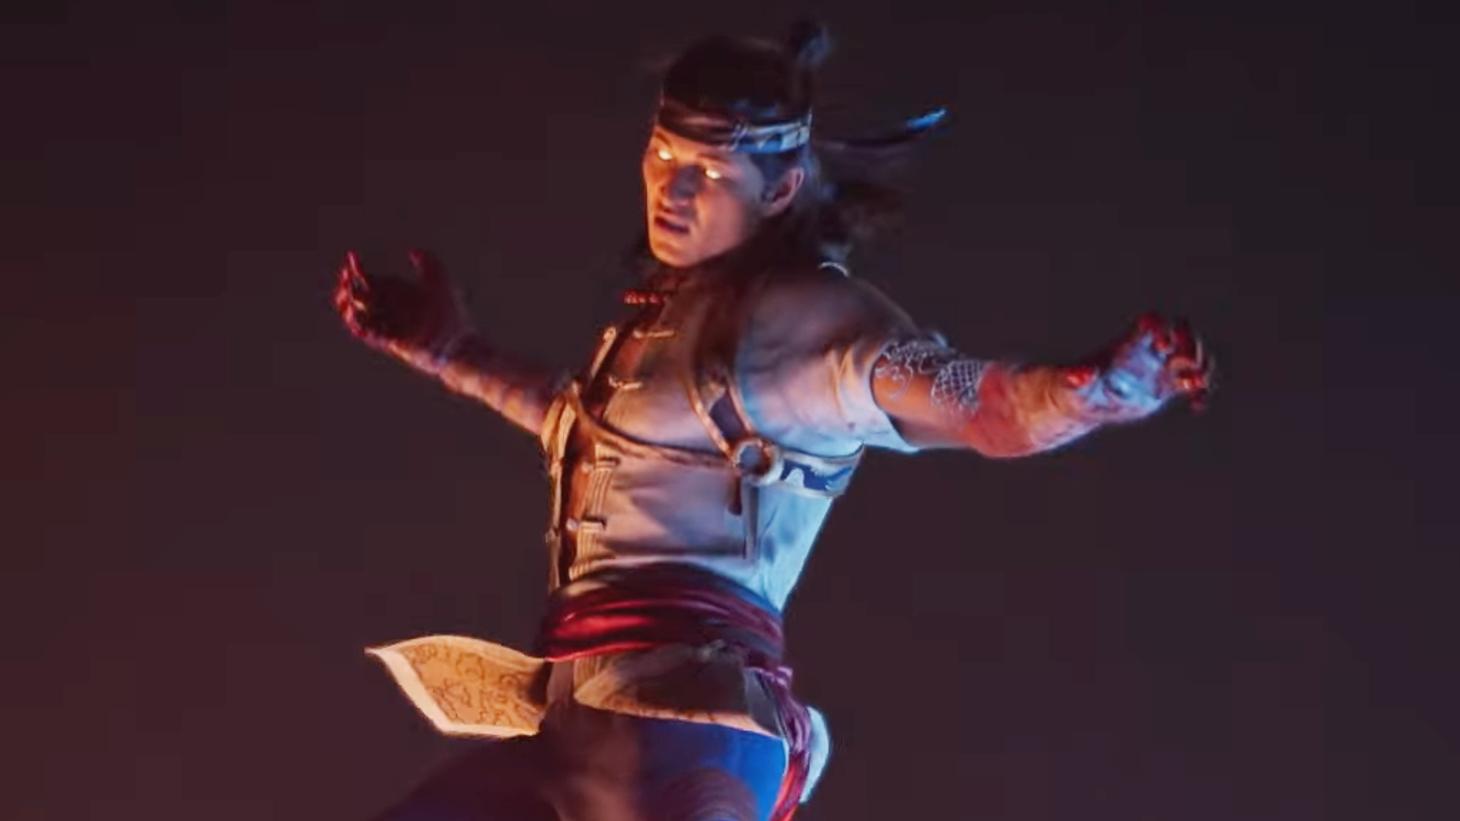 What we learned from the recent Mortal Kombat 12 announcement